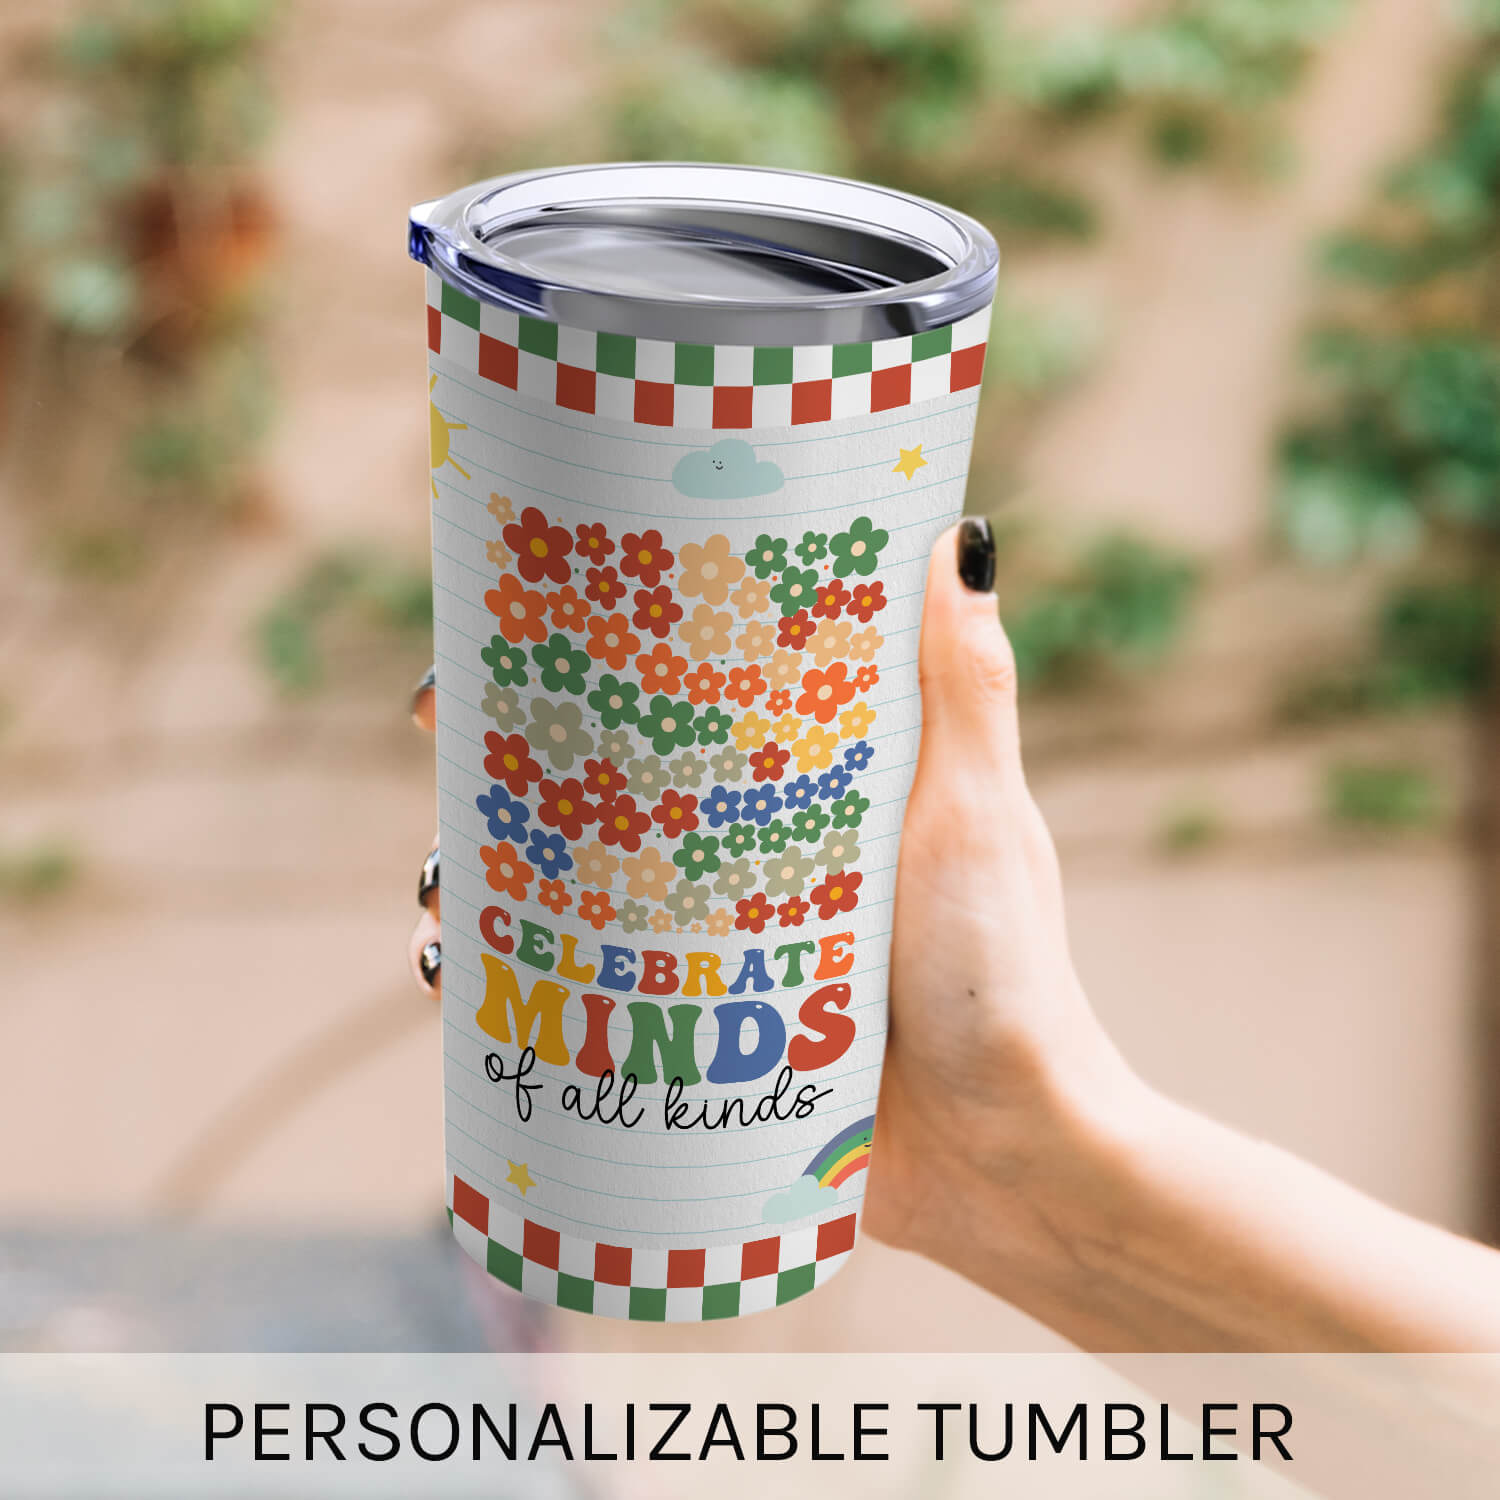 Celebrate Minds of All Kinds - Personalized Teacher's Day, Birthday or Christmas gift For Special Education Teacher - Custom Tumbler - MyMindfulGifts